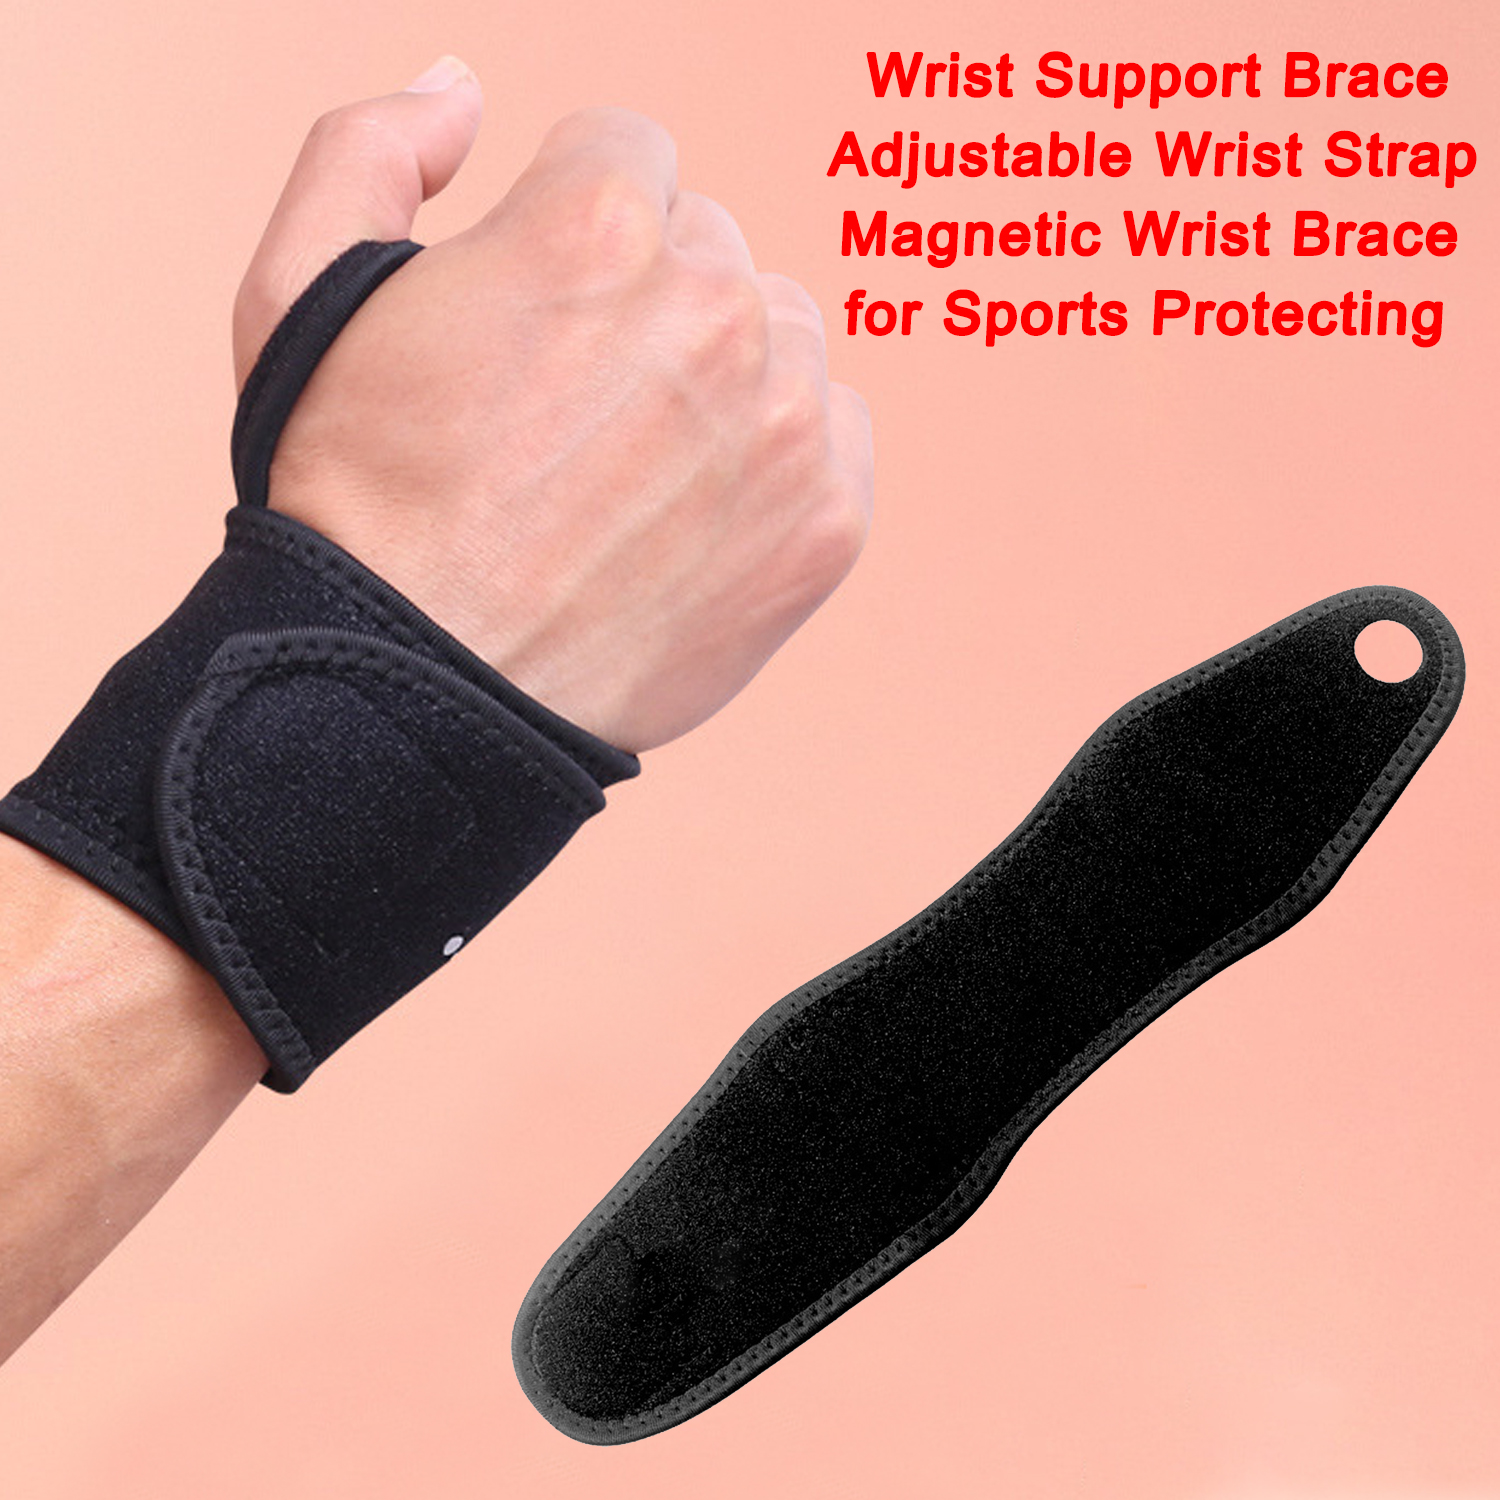 Wrist Support Brace Adjustable Wrist Strap Magnetic Wrist Brace for Sports Protecting